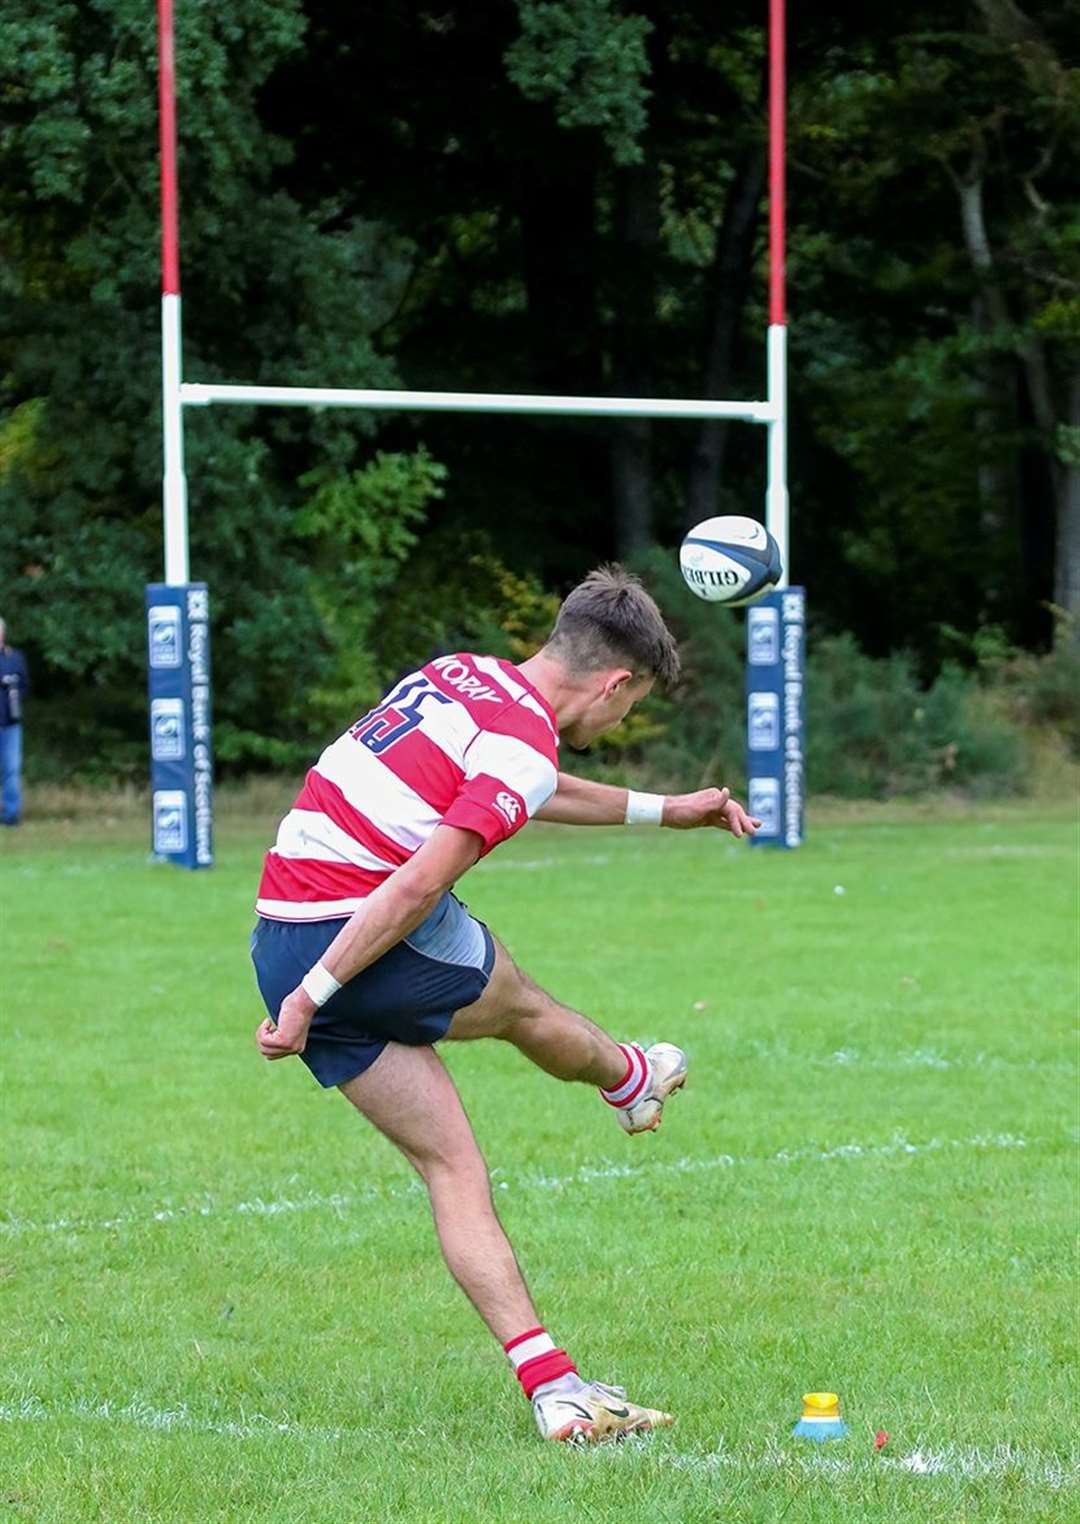 Hours of practise have helped Rory Millar become a deadly kicker in rugby.